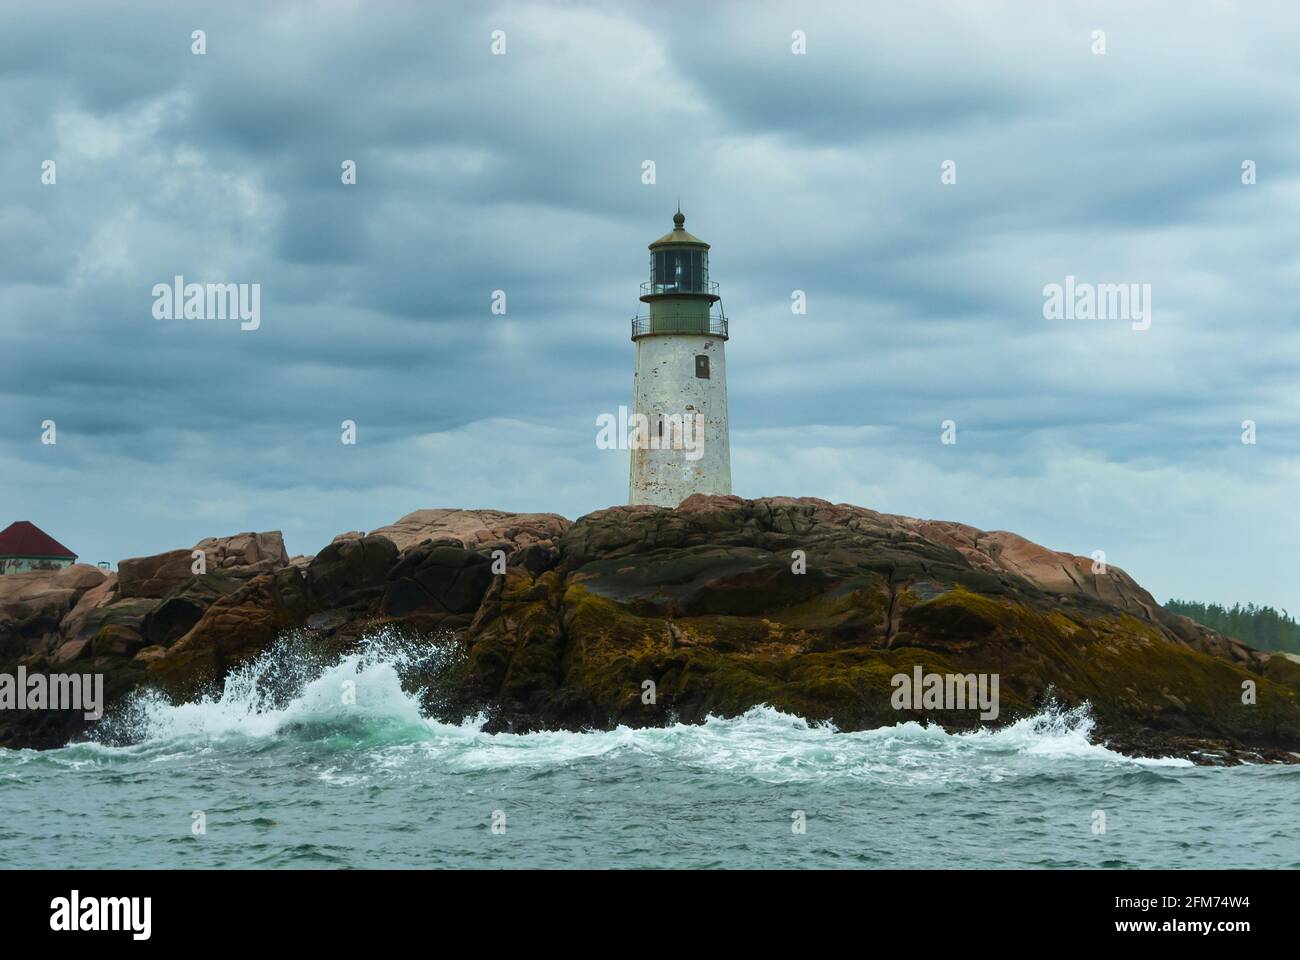 Waves break by old Moose Peak lighthouse tower on a rocky island, on a cloudy day as the sun breaks through storm clouds in Maine. Lighthouses of nort Stock Photo